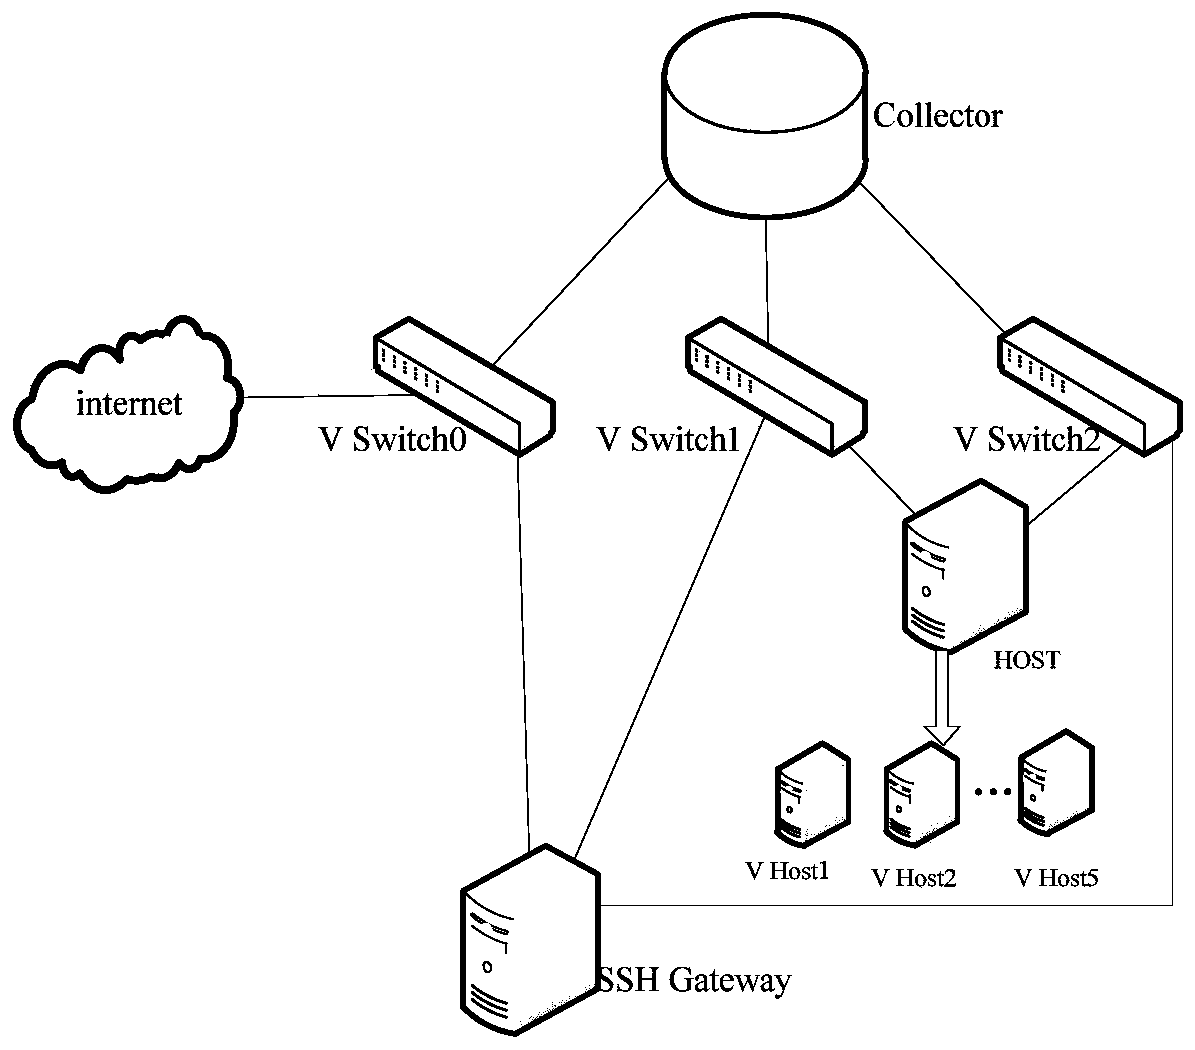 A method for analyzing network attacker behavior based on attack graph